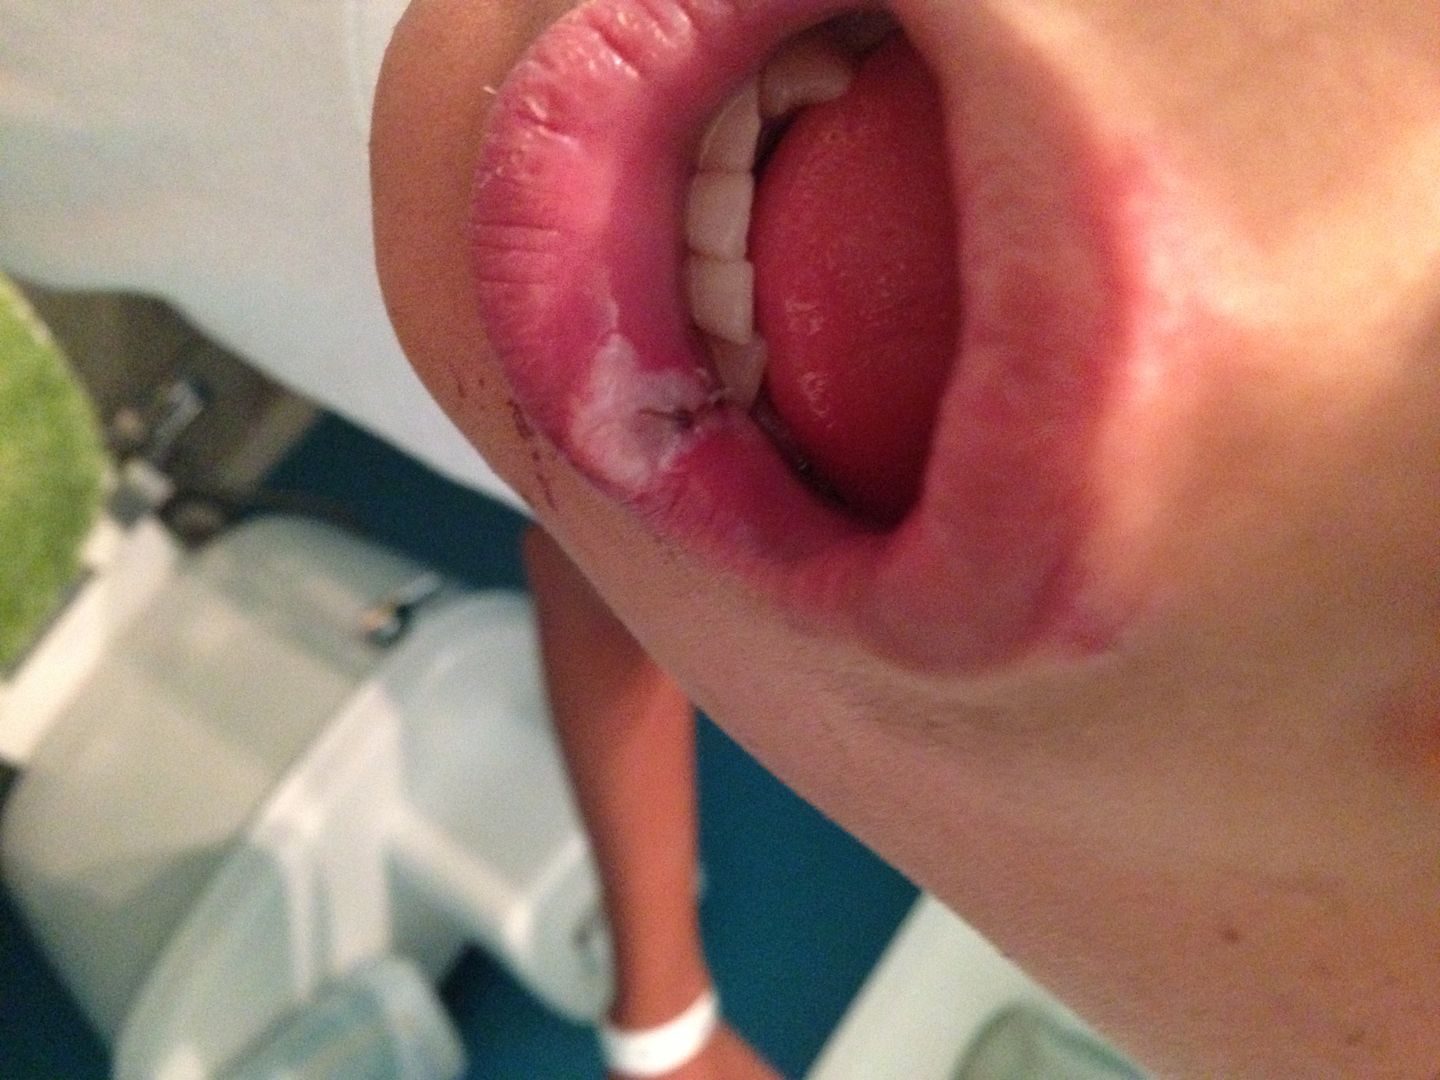 Stitches Inside Mouth